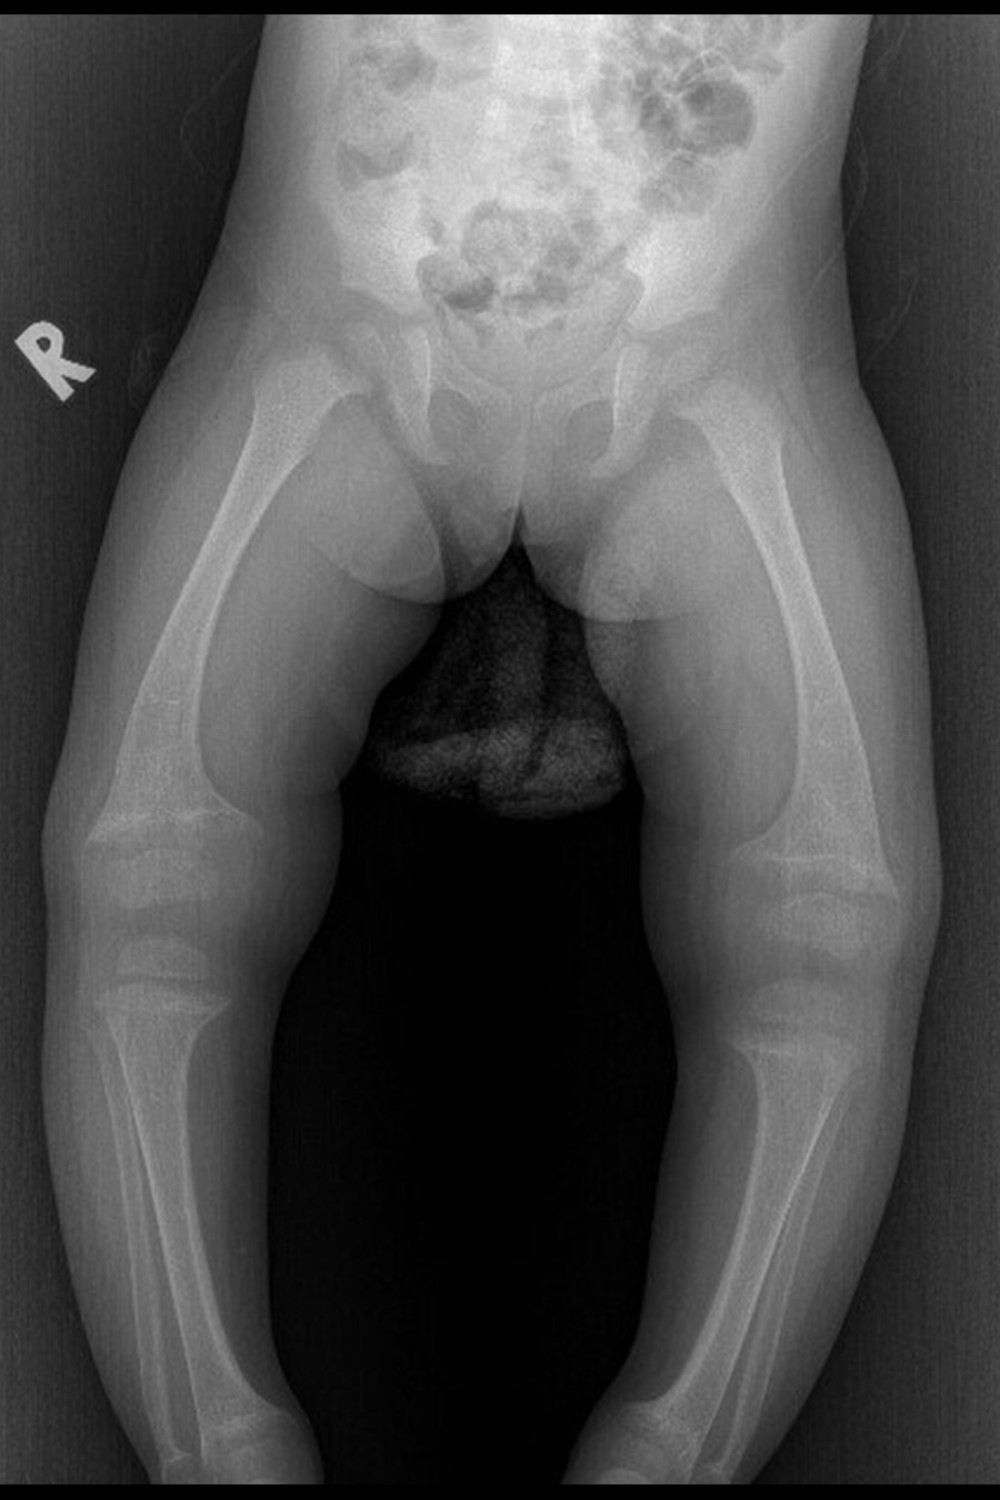 X-ray of lower limbs showing bowing of legs and widened metaphysis on bilateral knee joints.